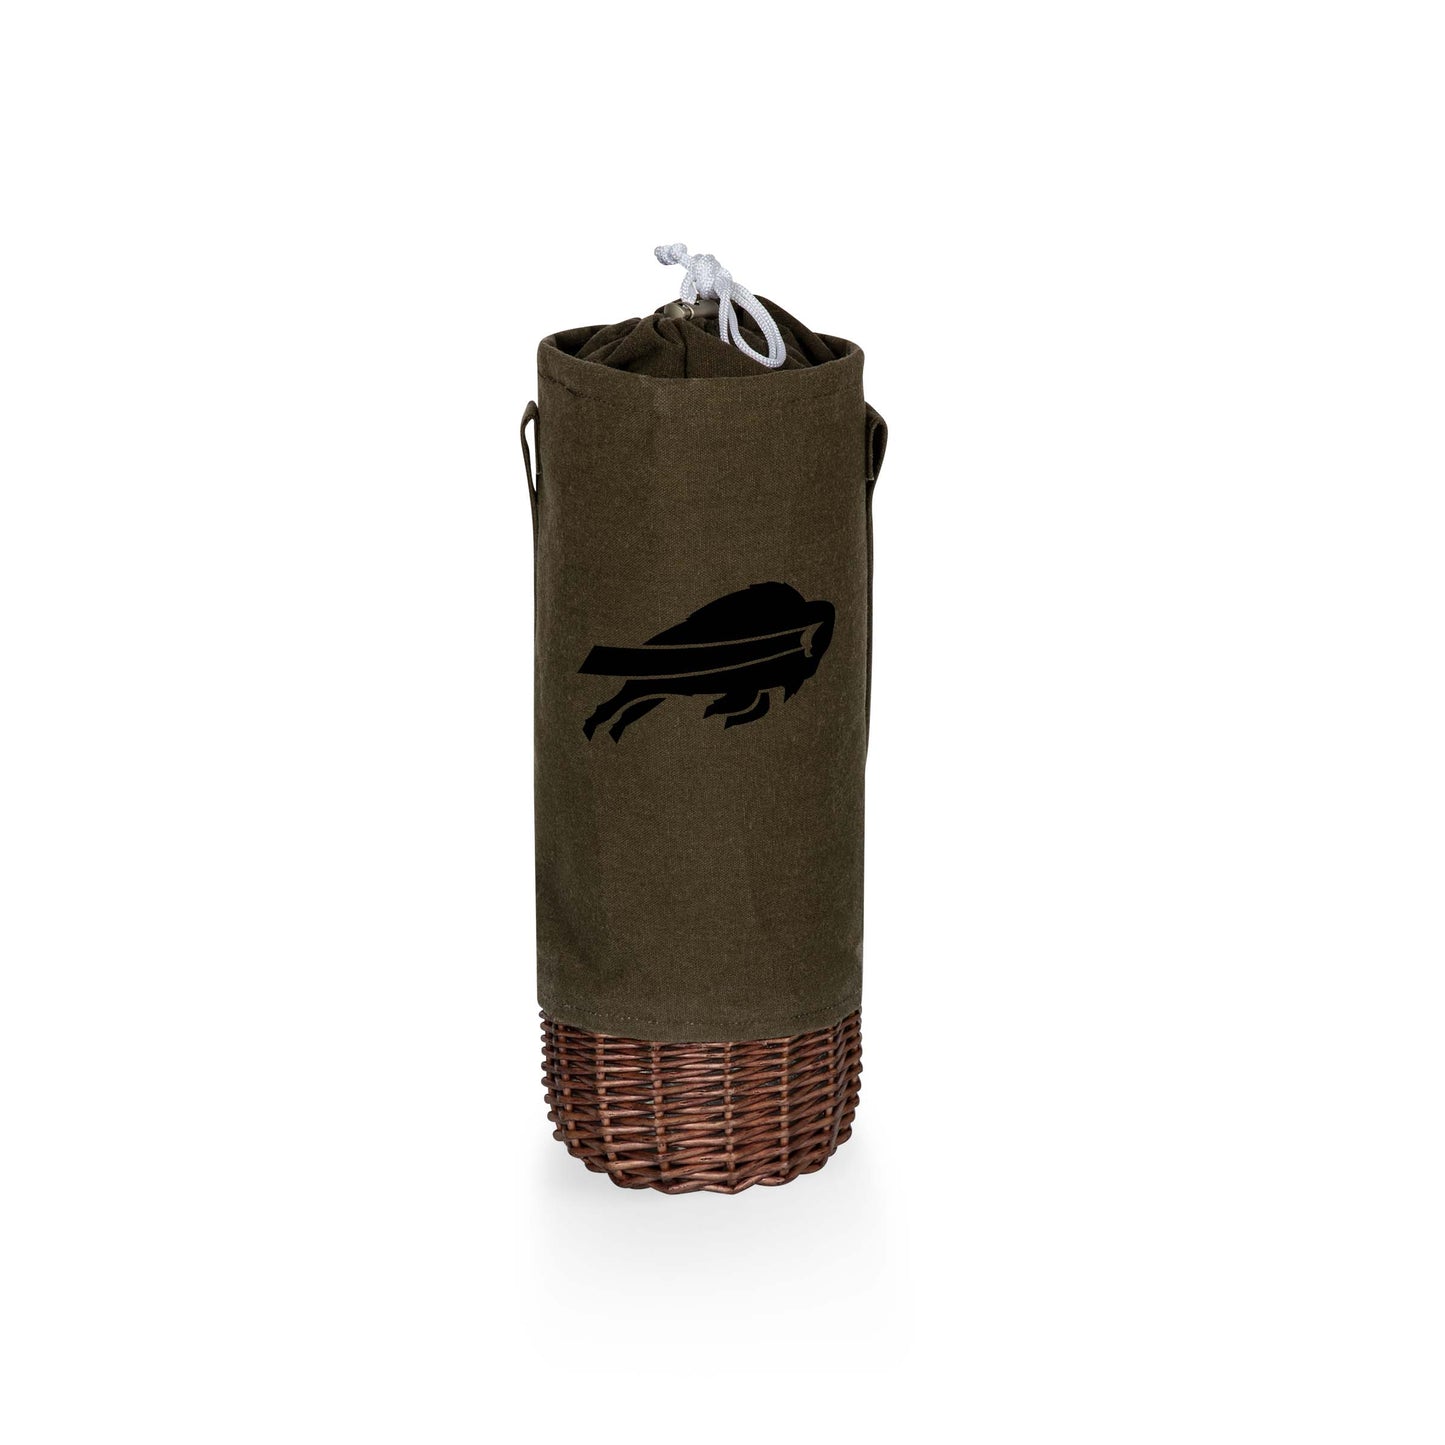 Buffalo Bills - Malbec Insulated Canvas and Willow Wine Bottle Basket